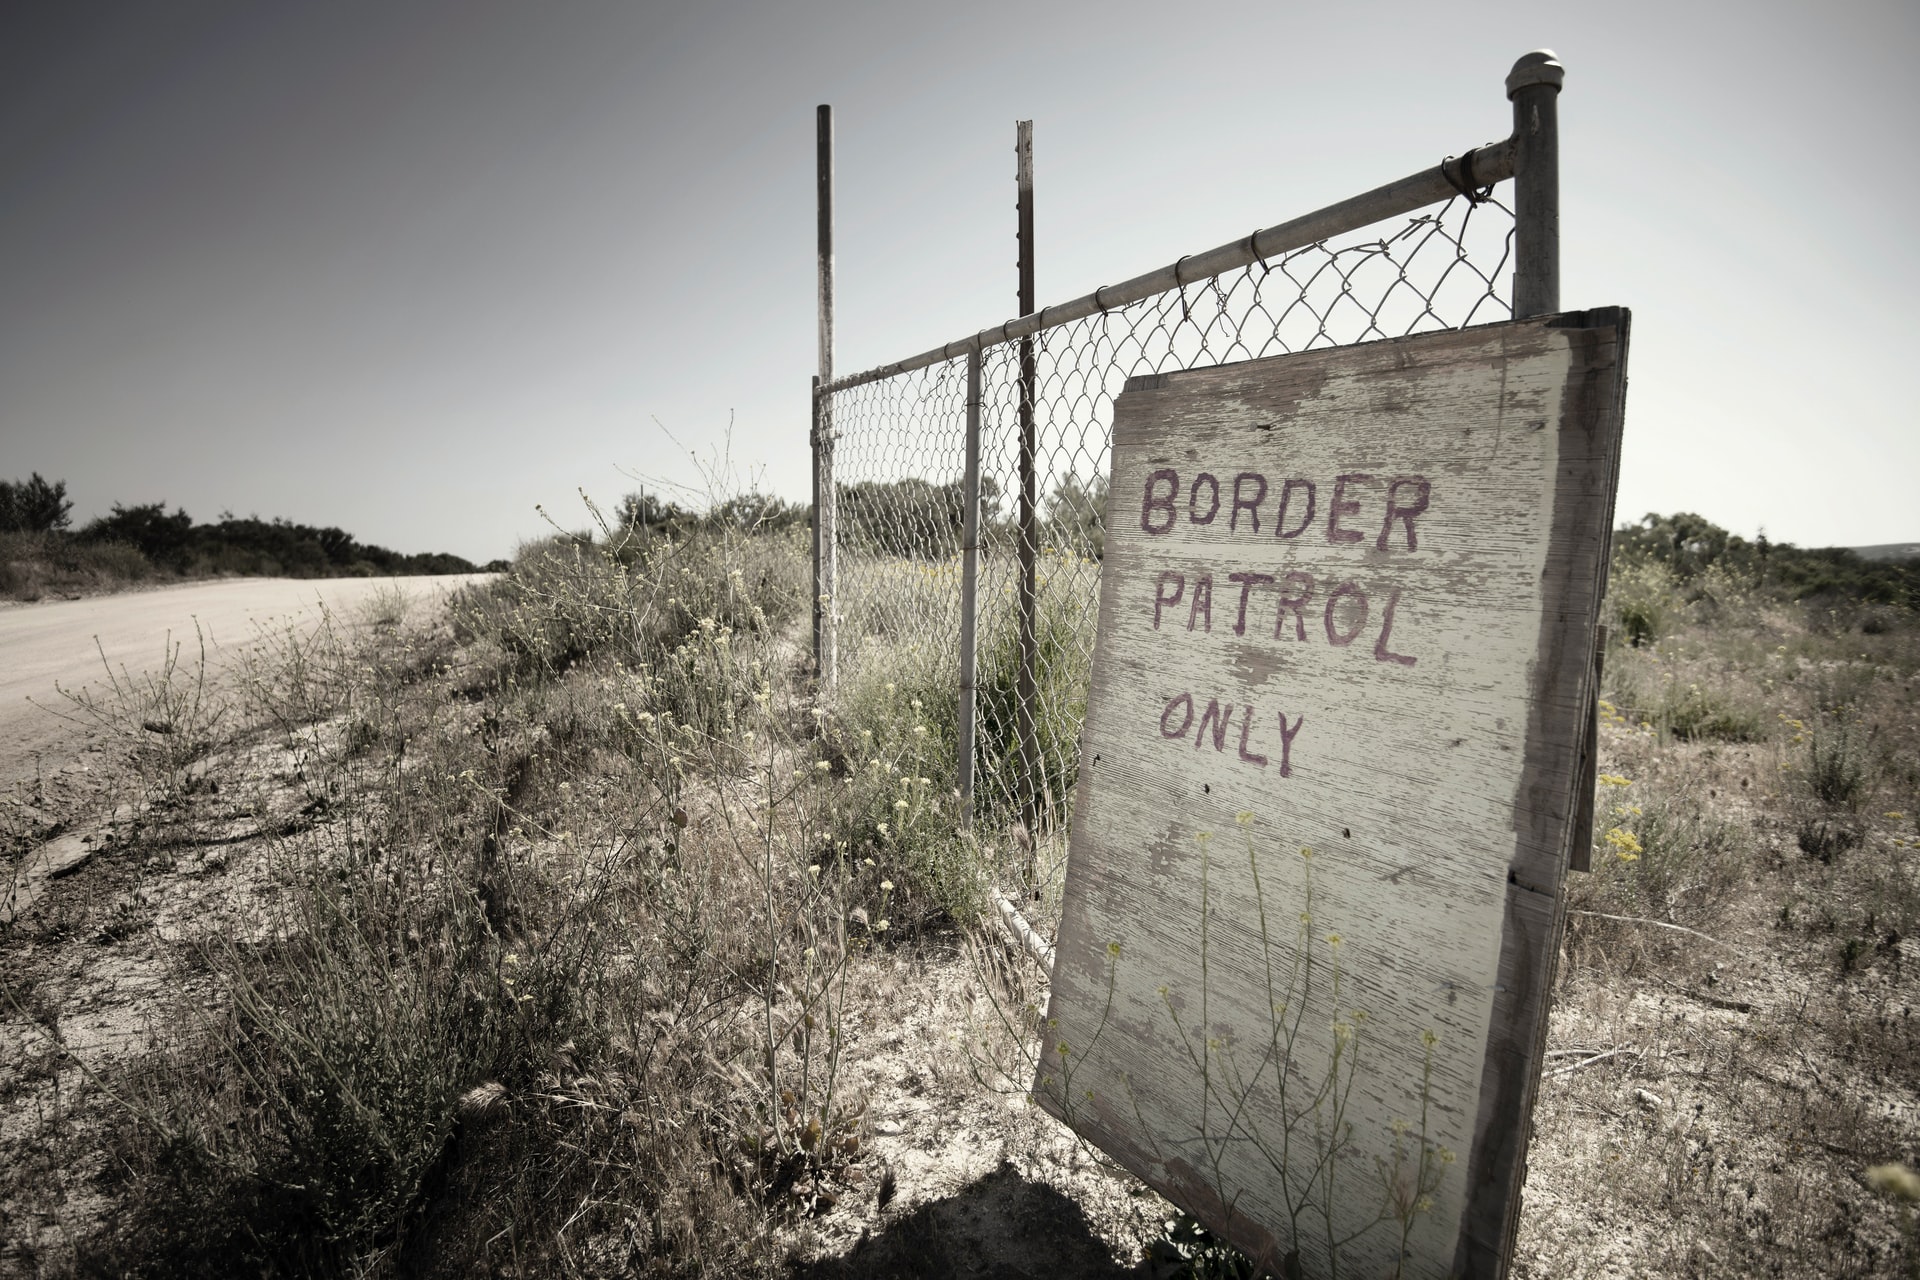 THE U.S./MEXICO BORDER—WHAT’S REALLY HAPPENING.